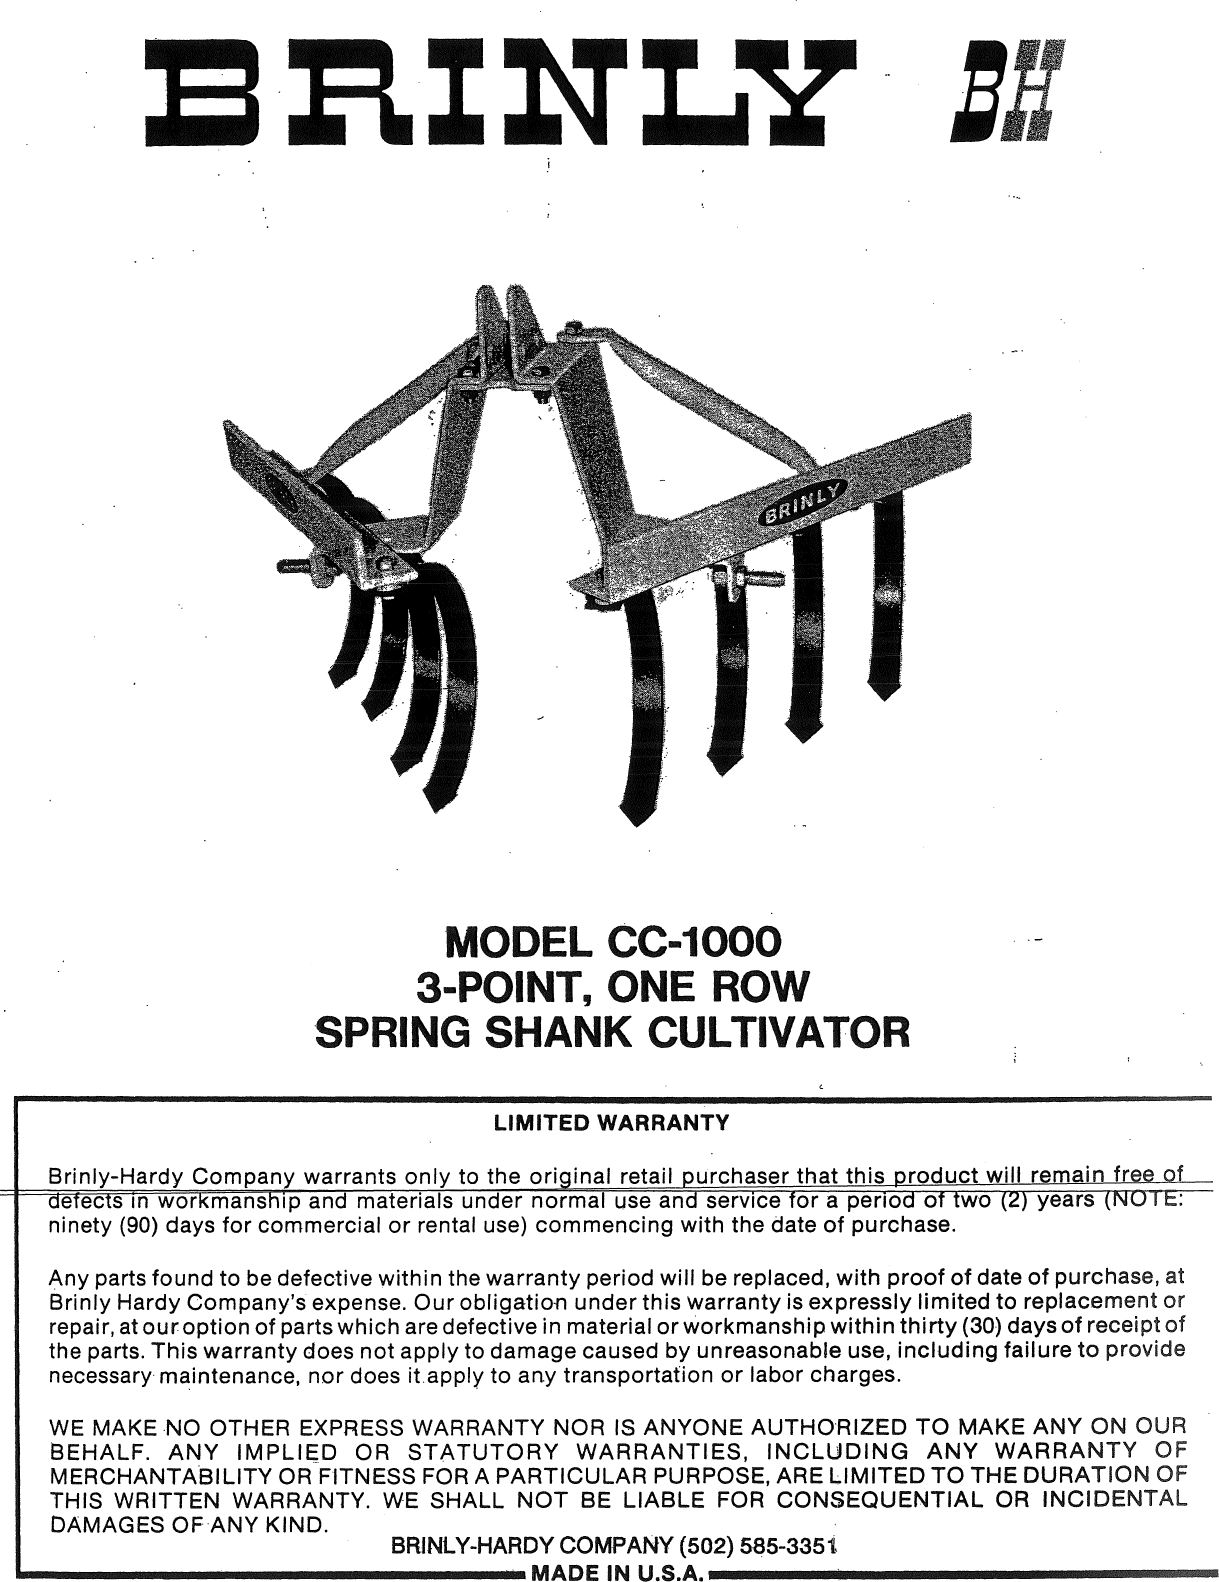 Page 1 of 4 - Brinly 3pt One Row Spring Shank Cultivator (CC-1000) Cultivator(CC-1000)